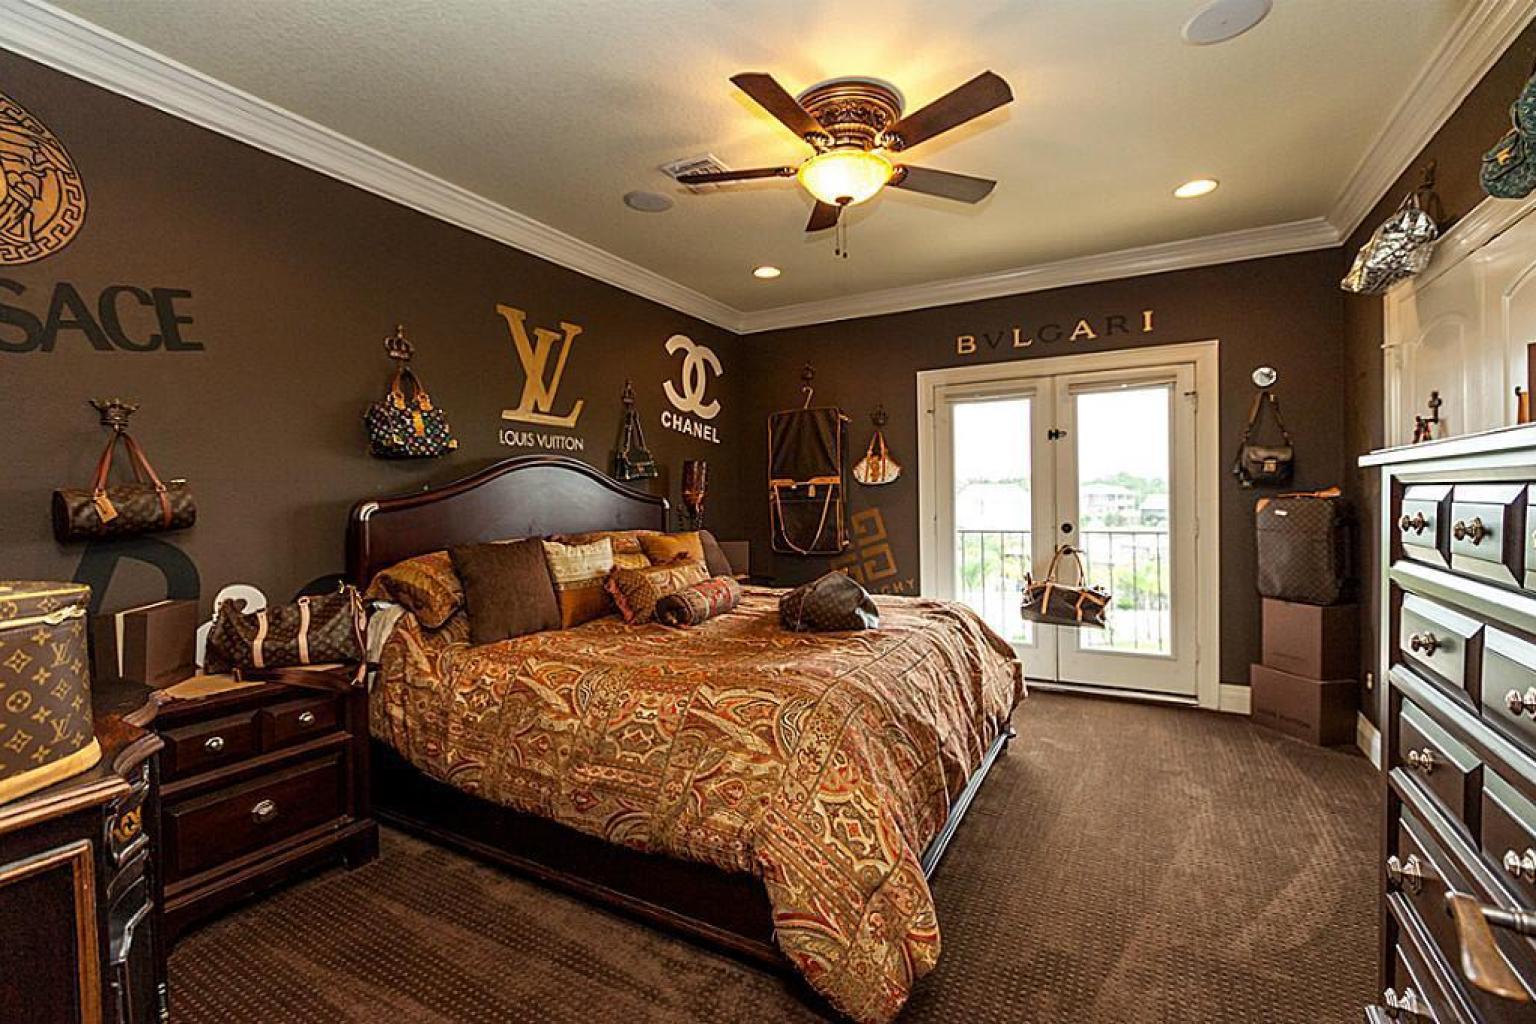 Louis Vuitton Bedroom In Texas Home For Sale Takes Fashion ...